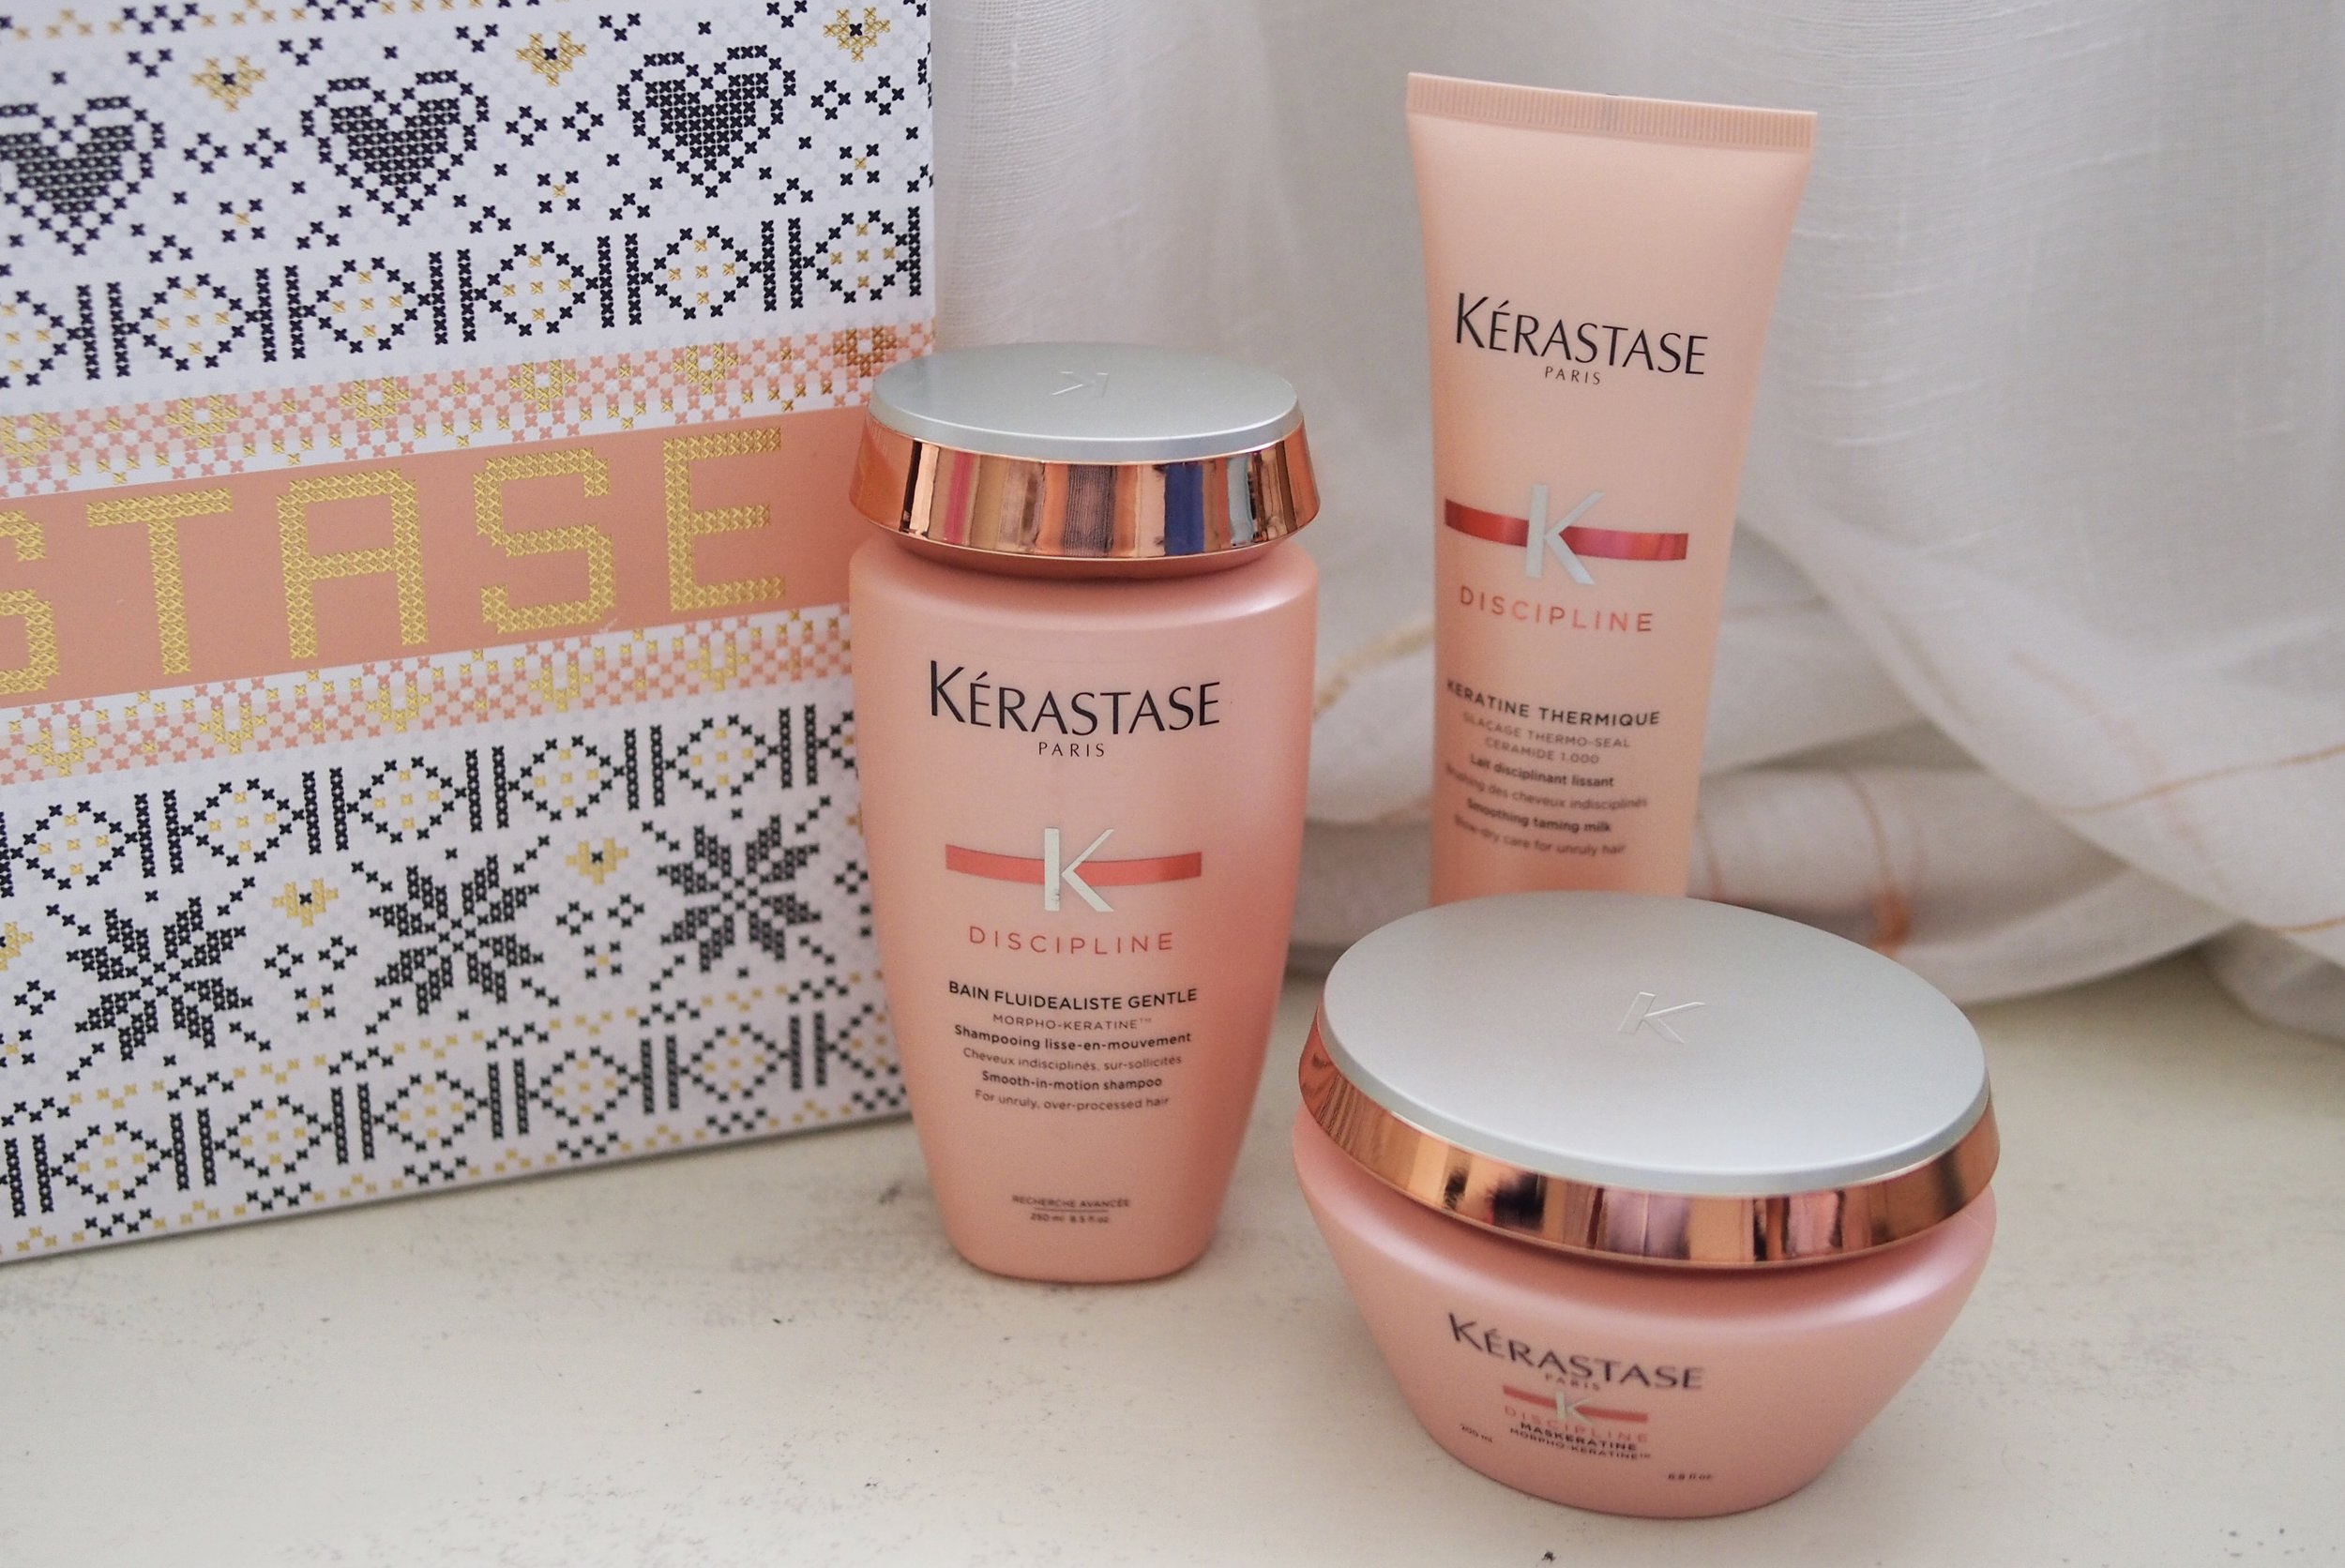 Trying out the Kerastase Fluidealiste Masque Ritual my grey, frizzy hair: Did it work? — Project Vanity